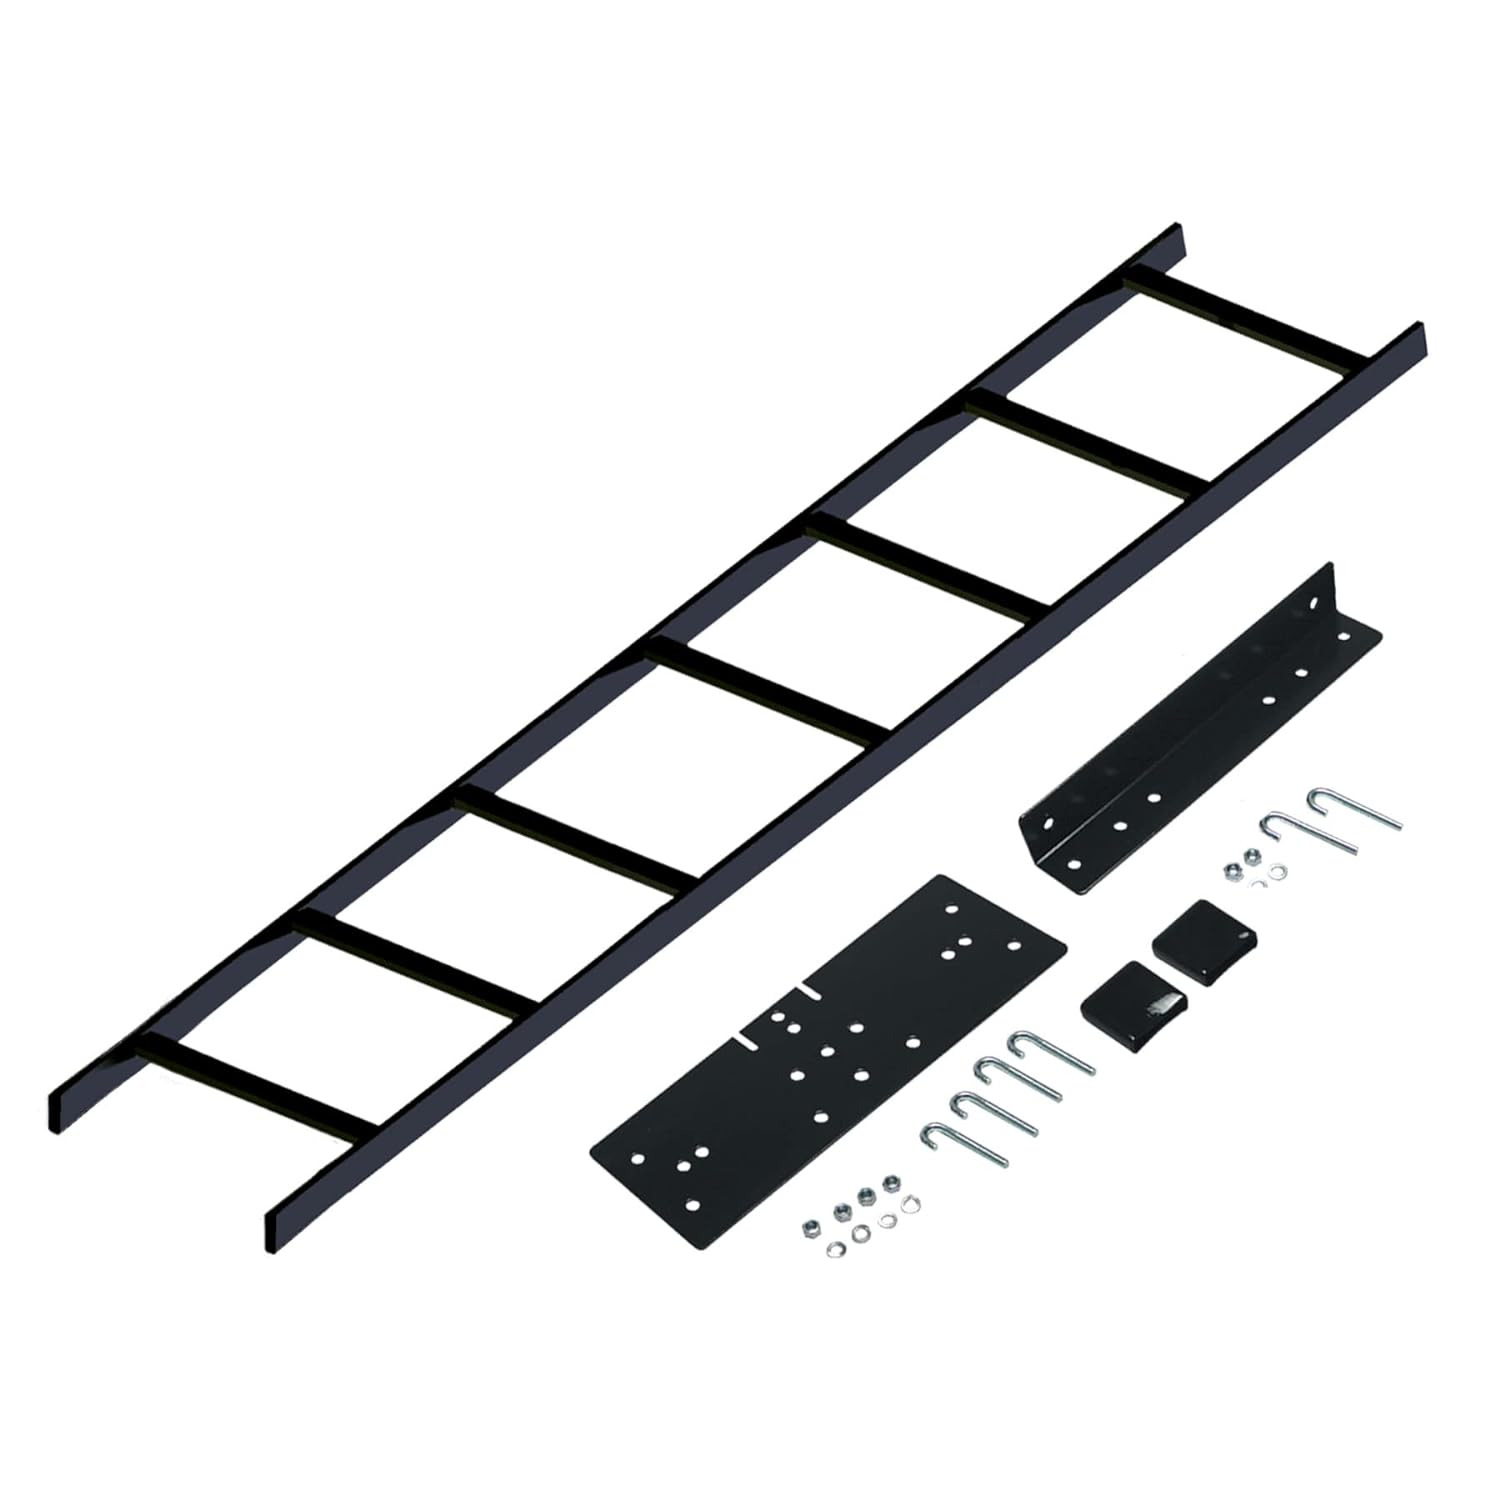 Ladder Rack 5 Feet Cable Runway Rack-To-Wall Kit